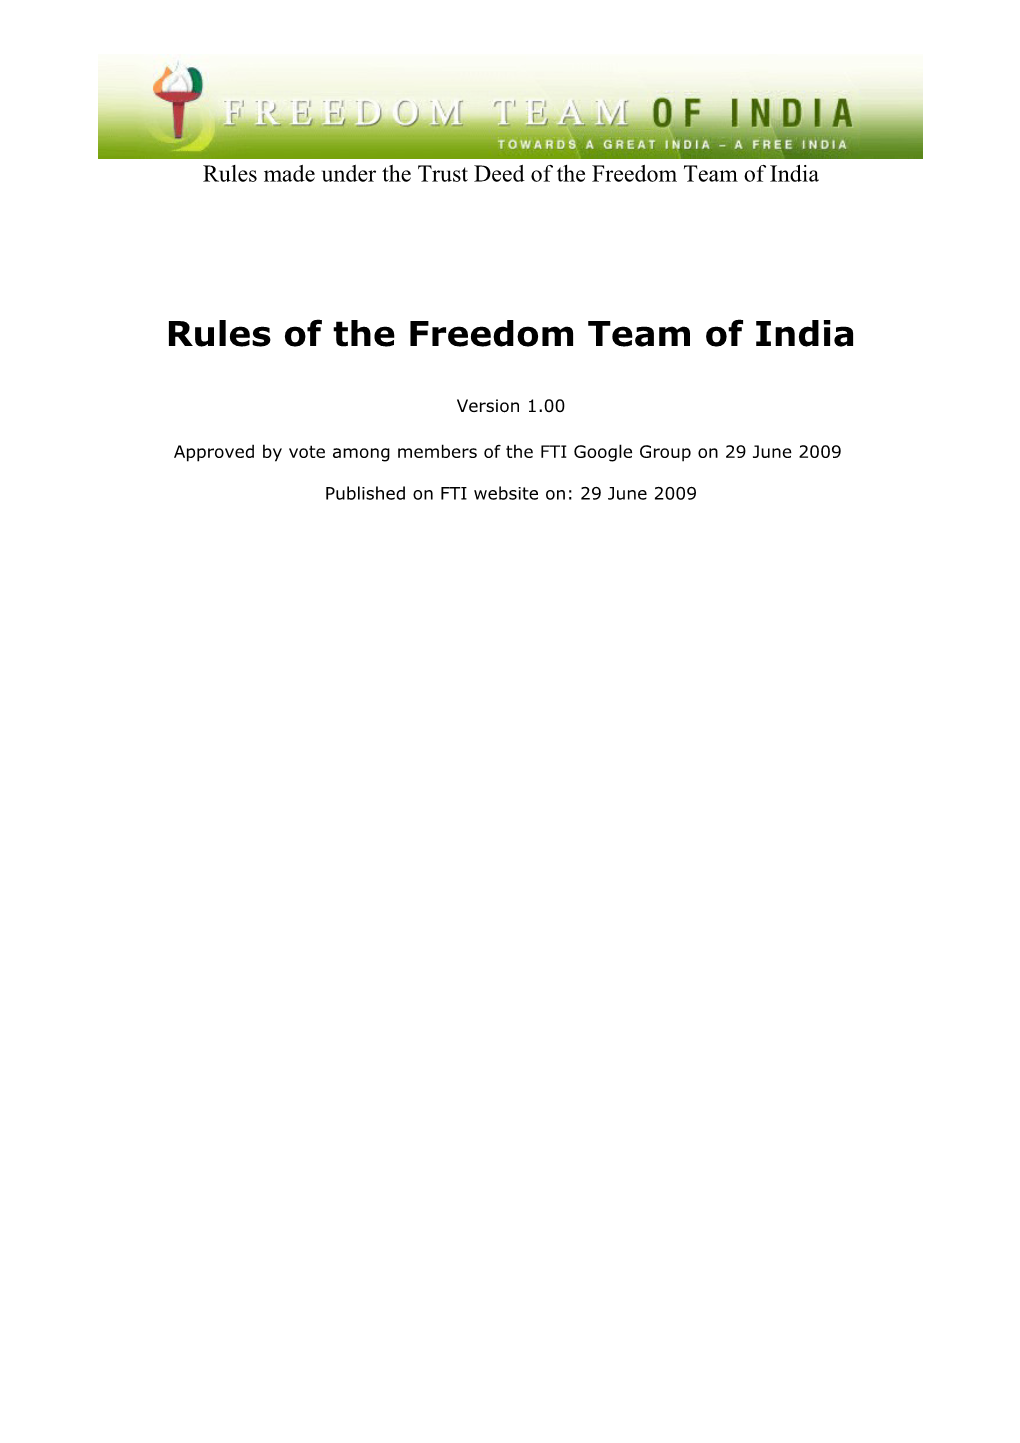 Rules of the Freedom Team of India